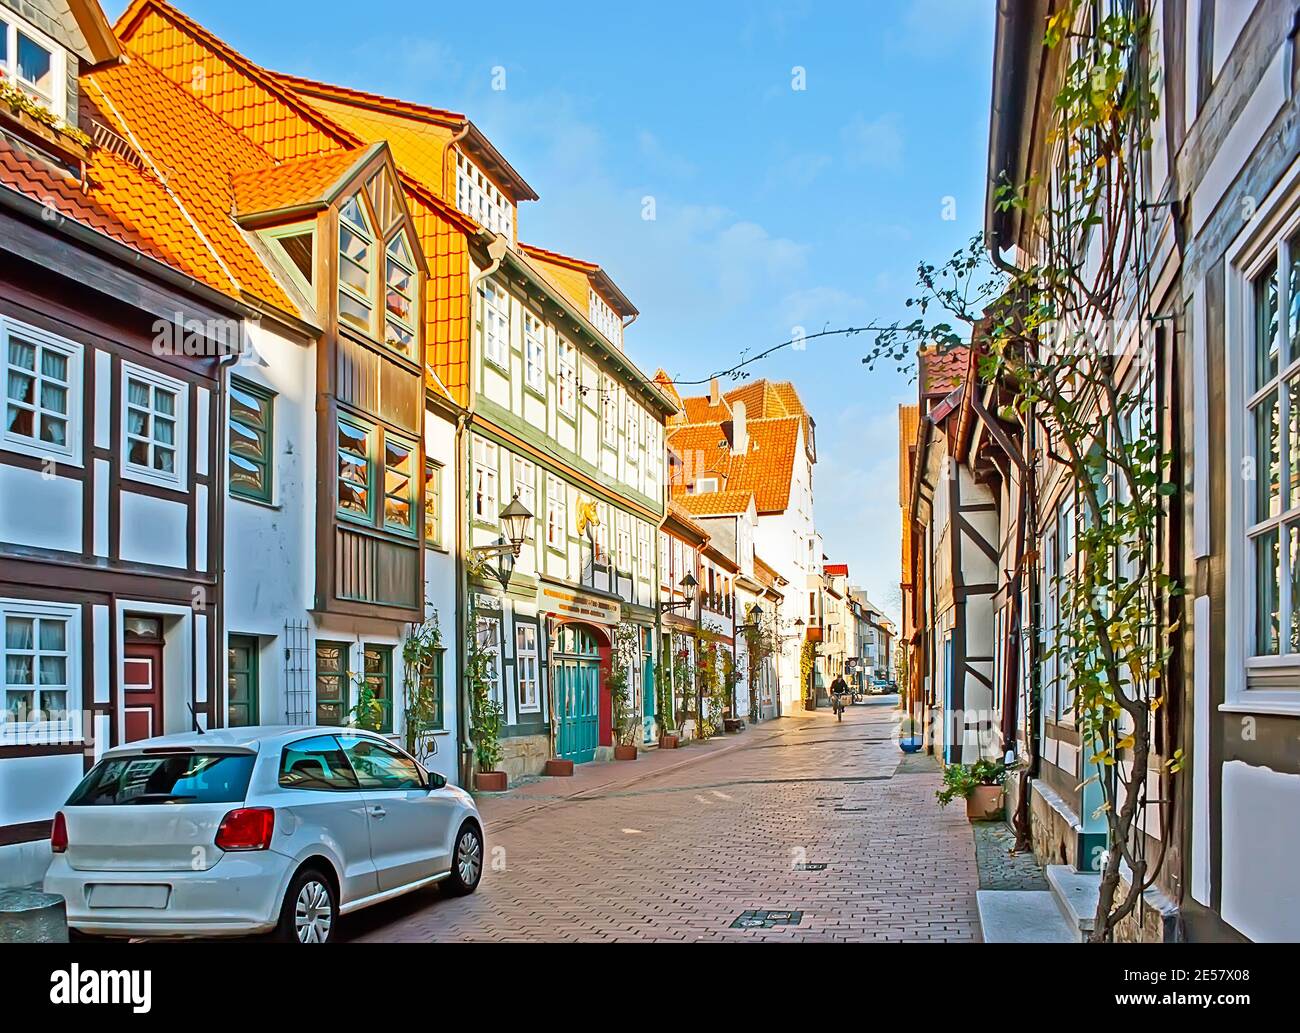 Adorable historical half-timbered houses in Gelber Stern street of Hildesheim Old Town, Germany Stock Photo